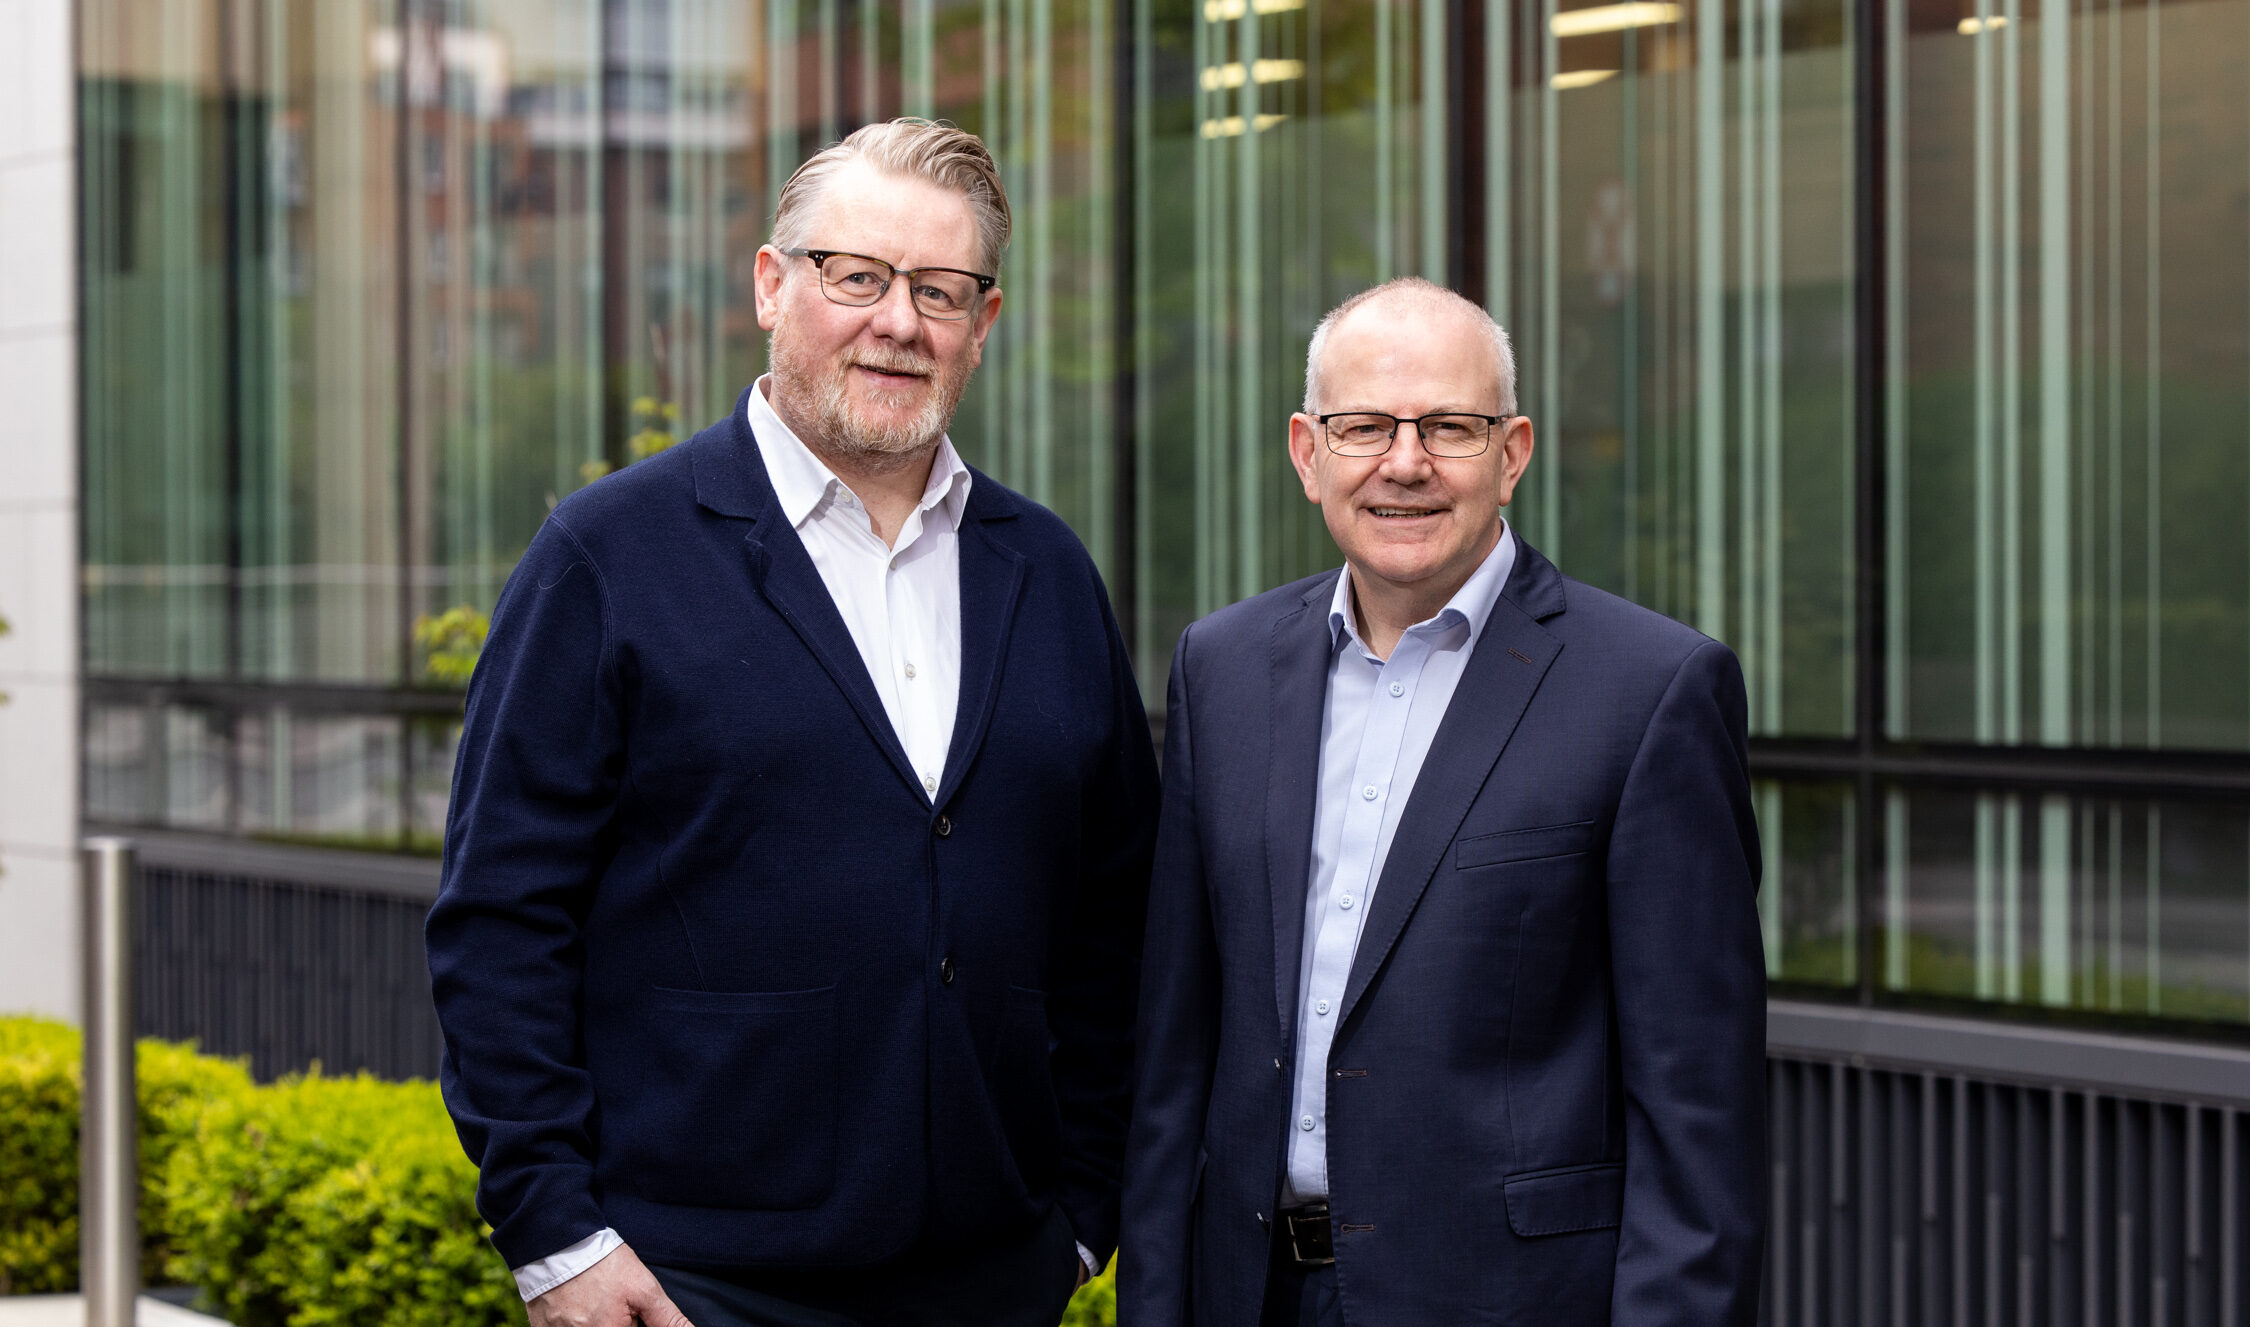 Paddy Naughton, EduCampus CEO and Mr. David Smith, EduCampus Board Chairperson